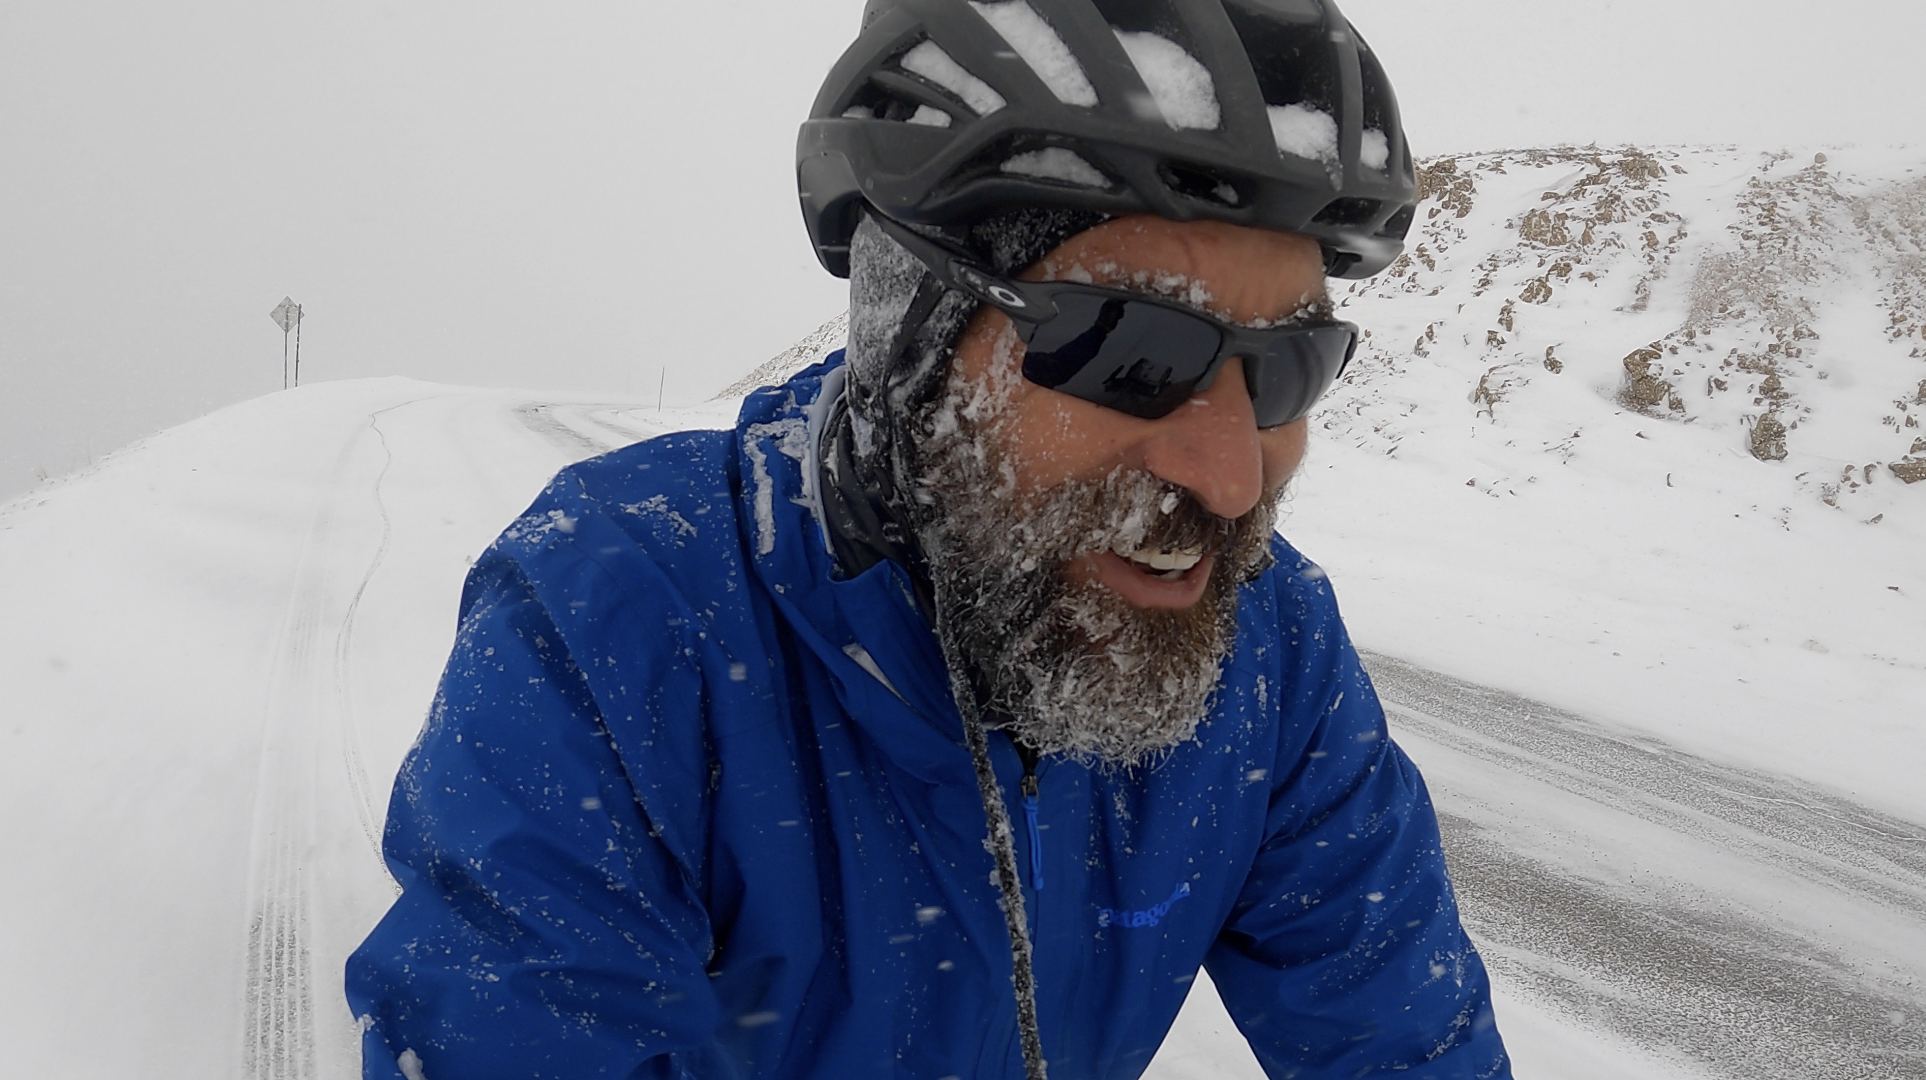 cyclsist face in the snow